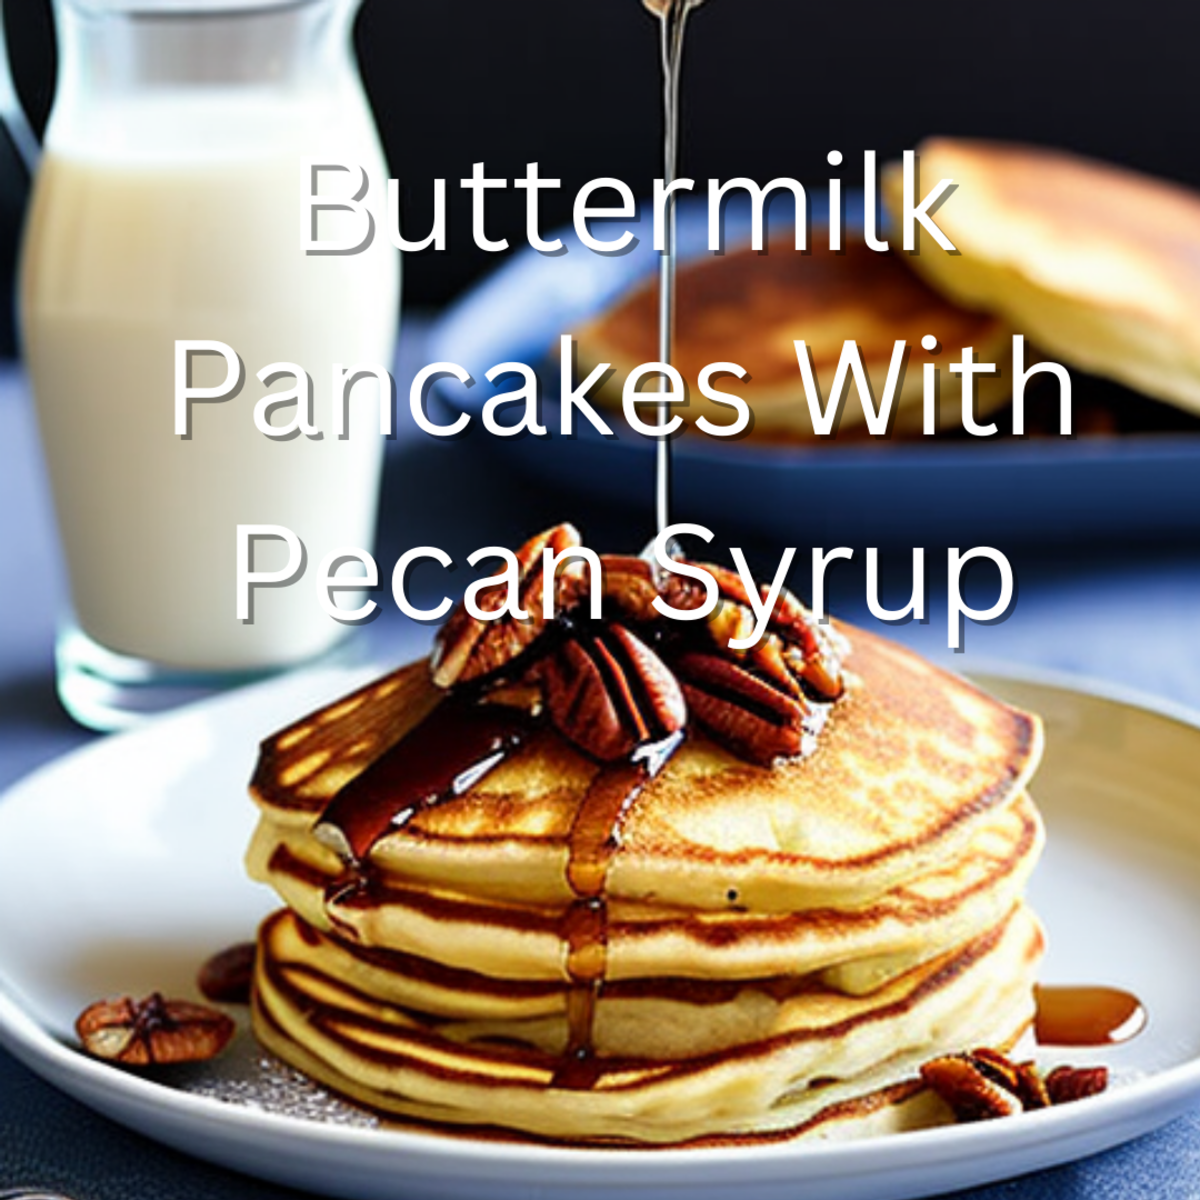 Buttermilk Pancakes With Pecan Syrup